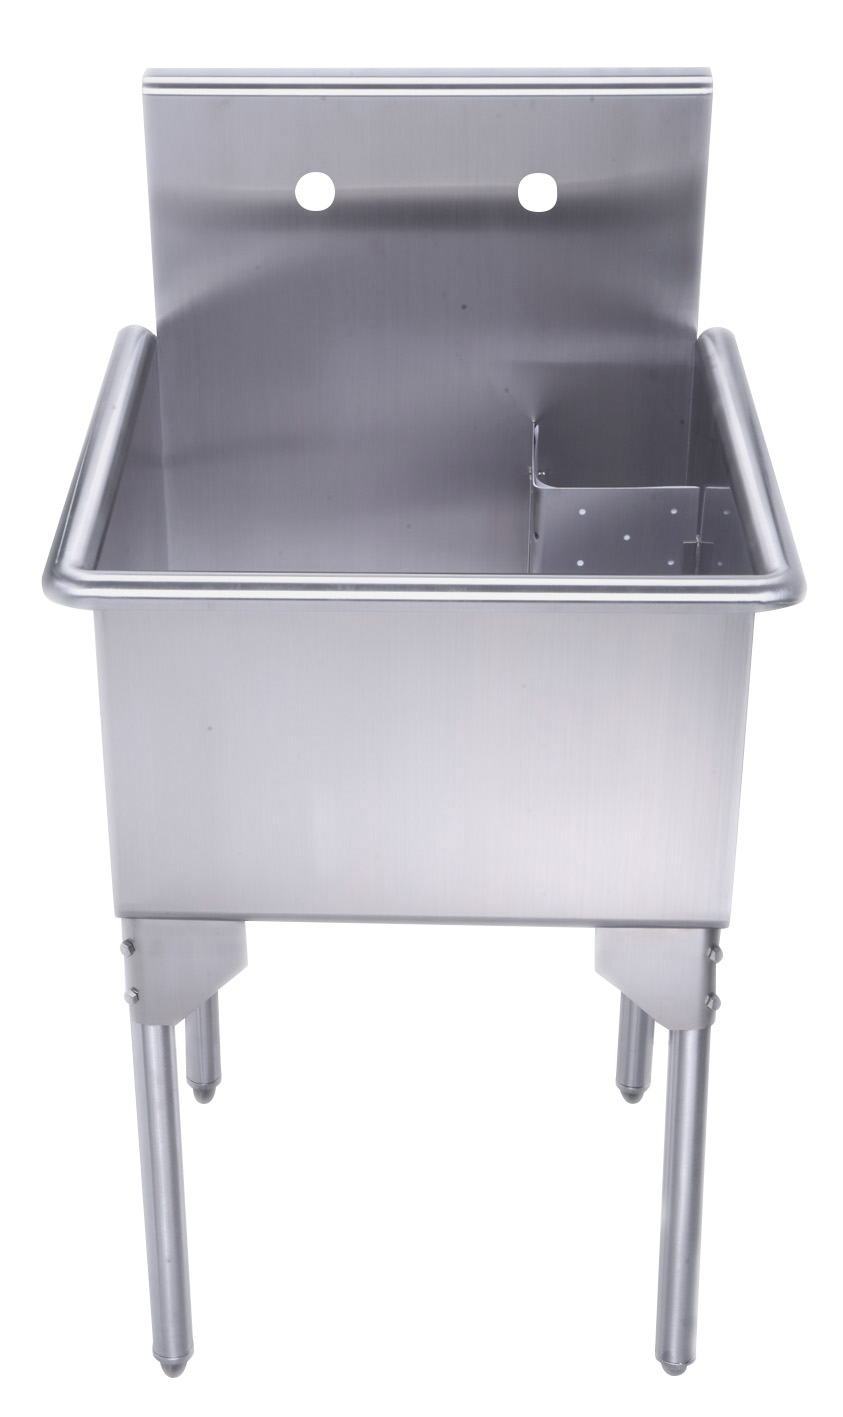 Whitehaus WHLS2020-NP 20" Brushed Stainless Steel Freestanding Utility Sink